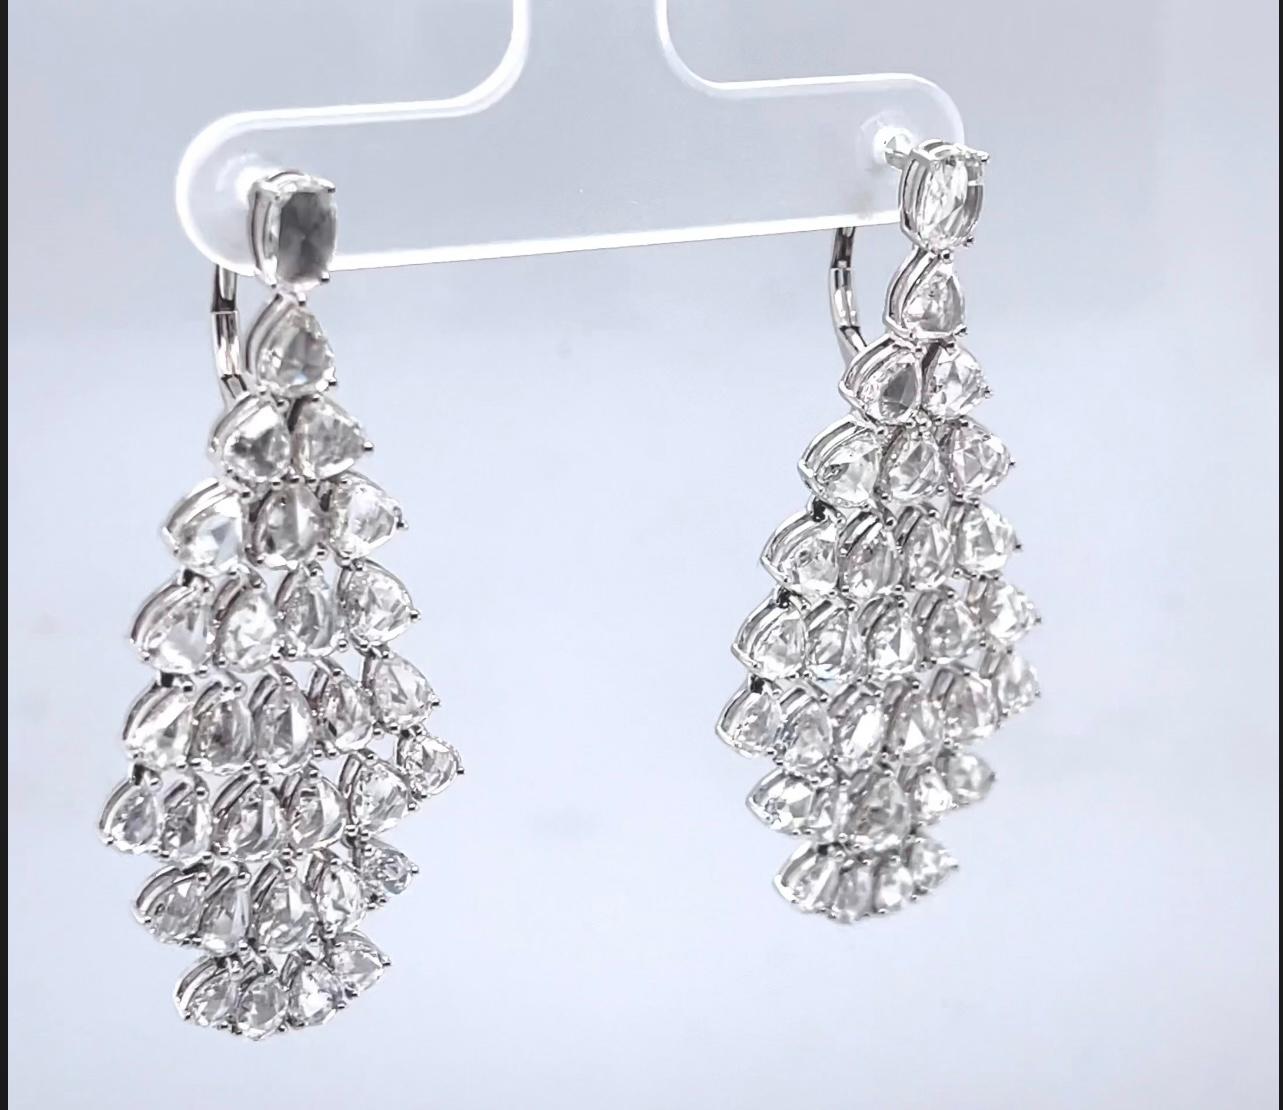 Rose Cut Diamond Chandelier Earrings

Total Carat Weight of 10.50 carats

F- H Color VS Clarity

Set in 18K White Gold

Length: 1.86 inches

Stock# : J5752

